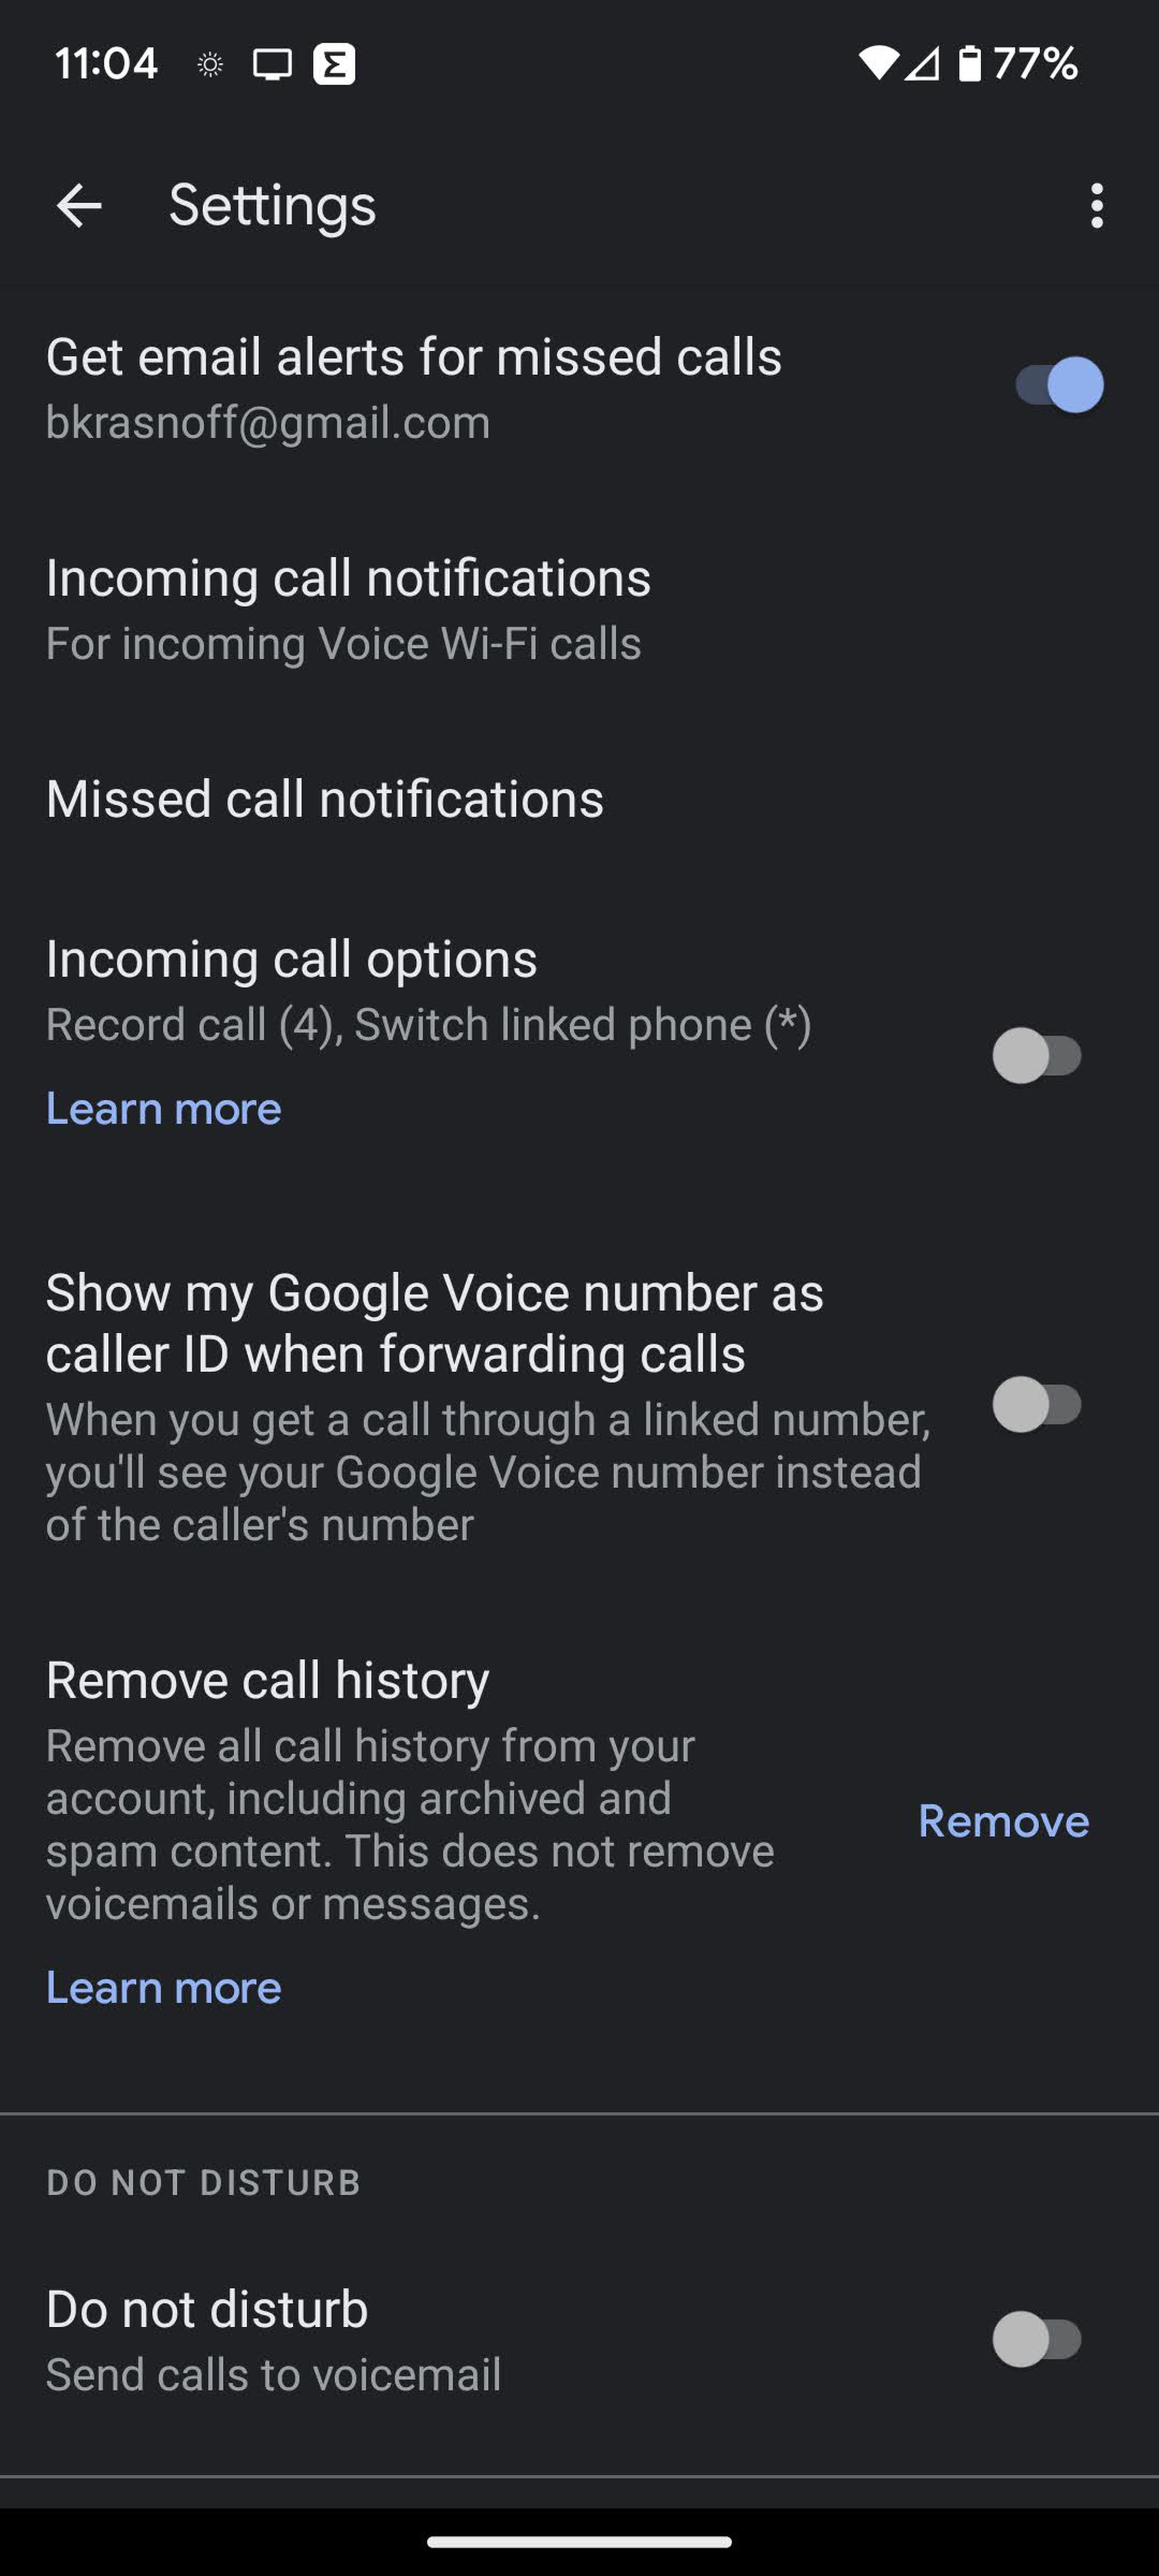 Settings menu for Google Voice showing “Incoming call options” toggle.